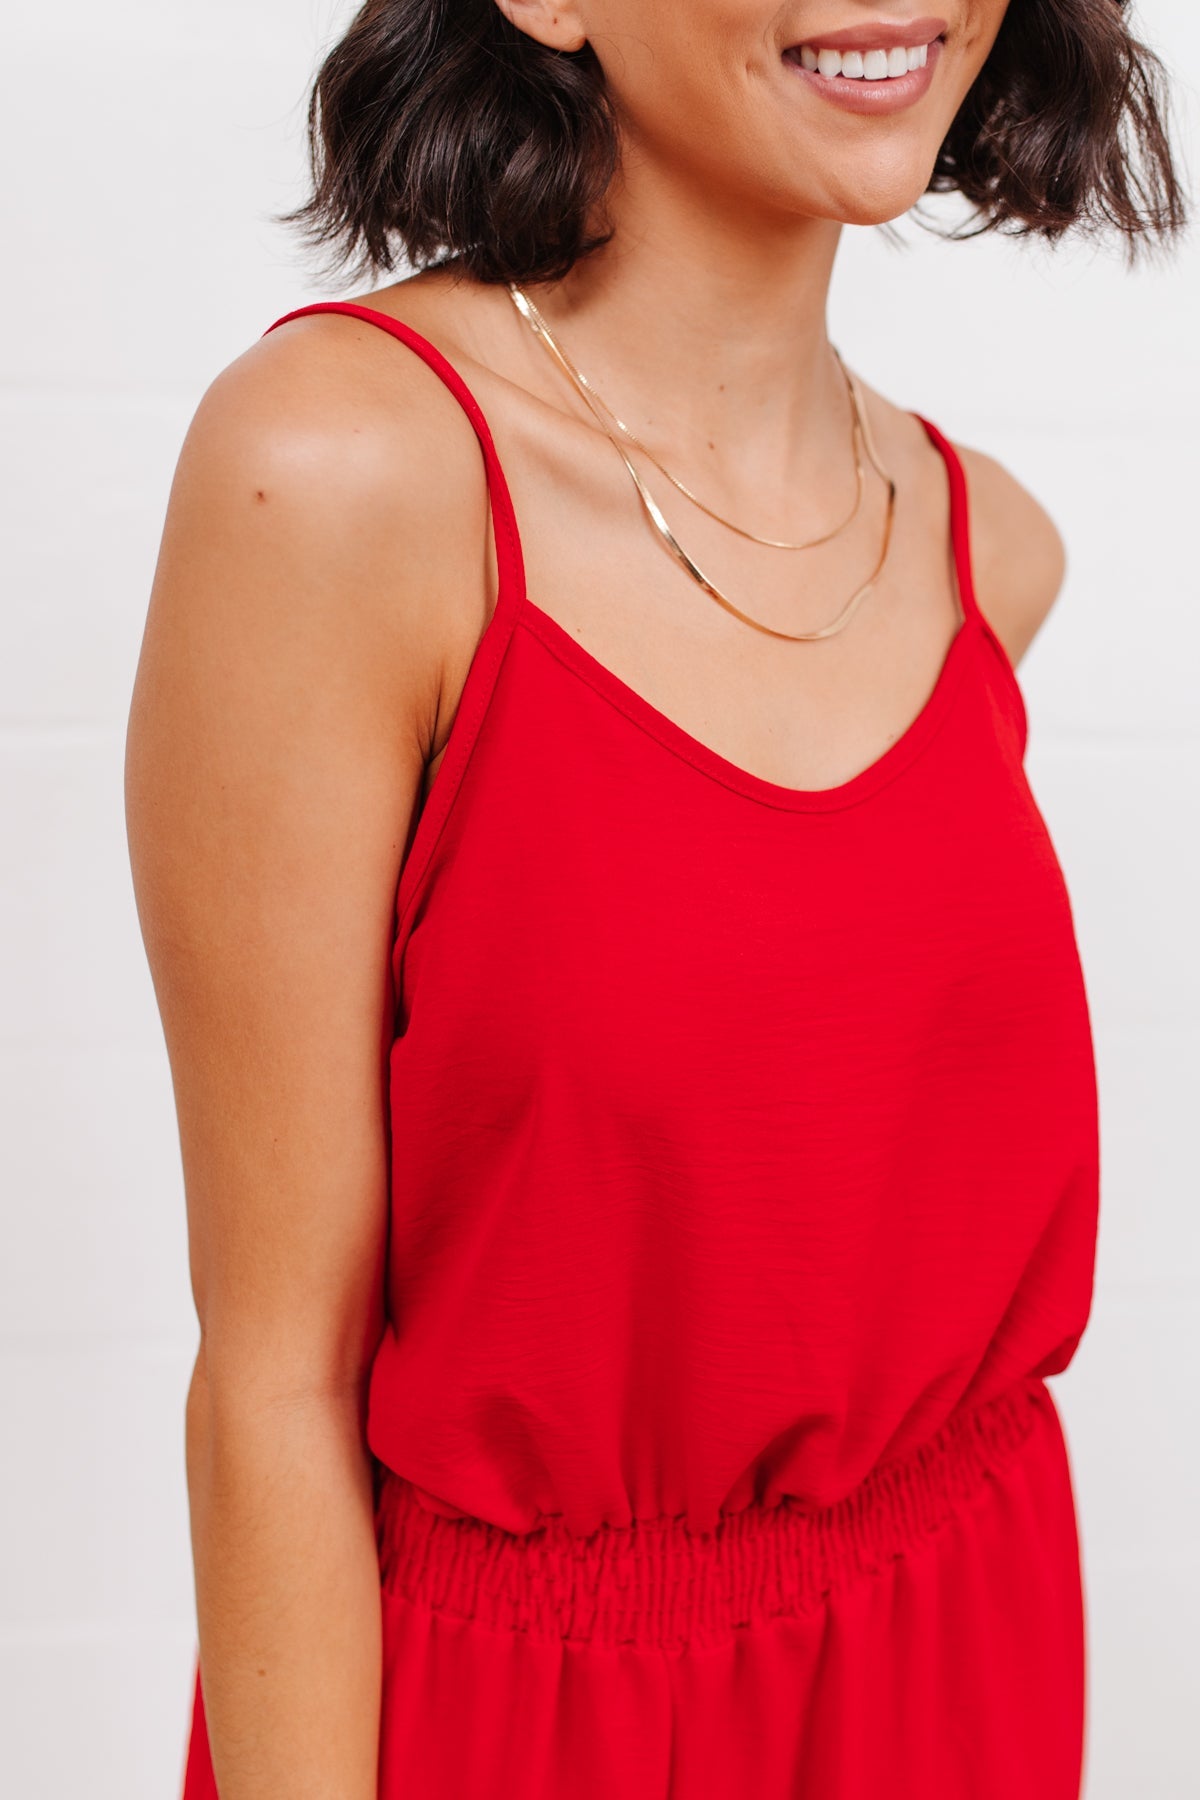 Livin' The Dream Jumpsuit in Red Womens Southern Soul Collectives 